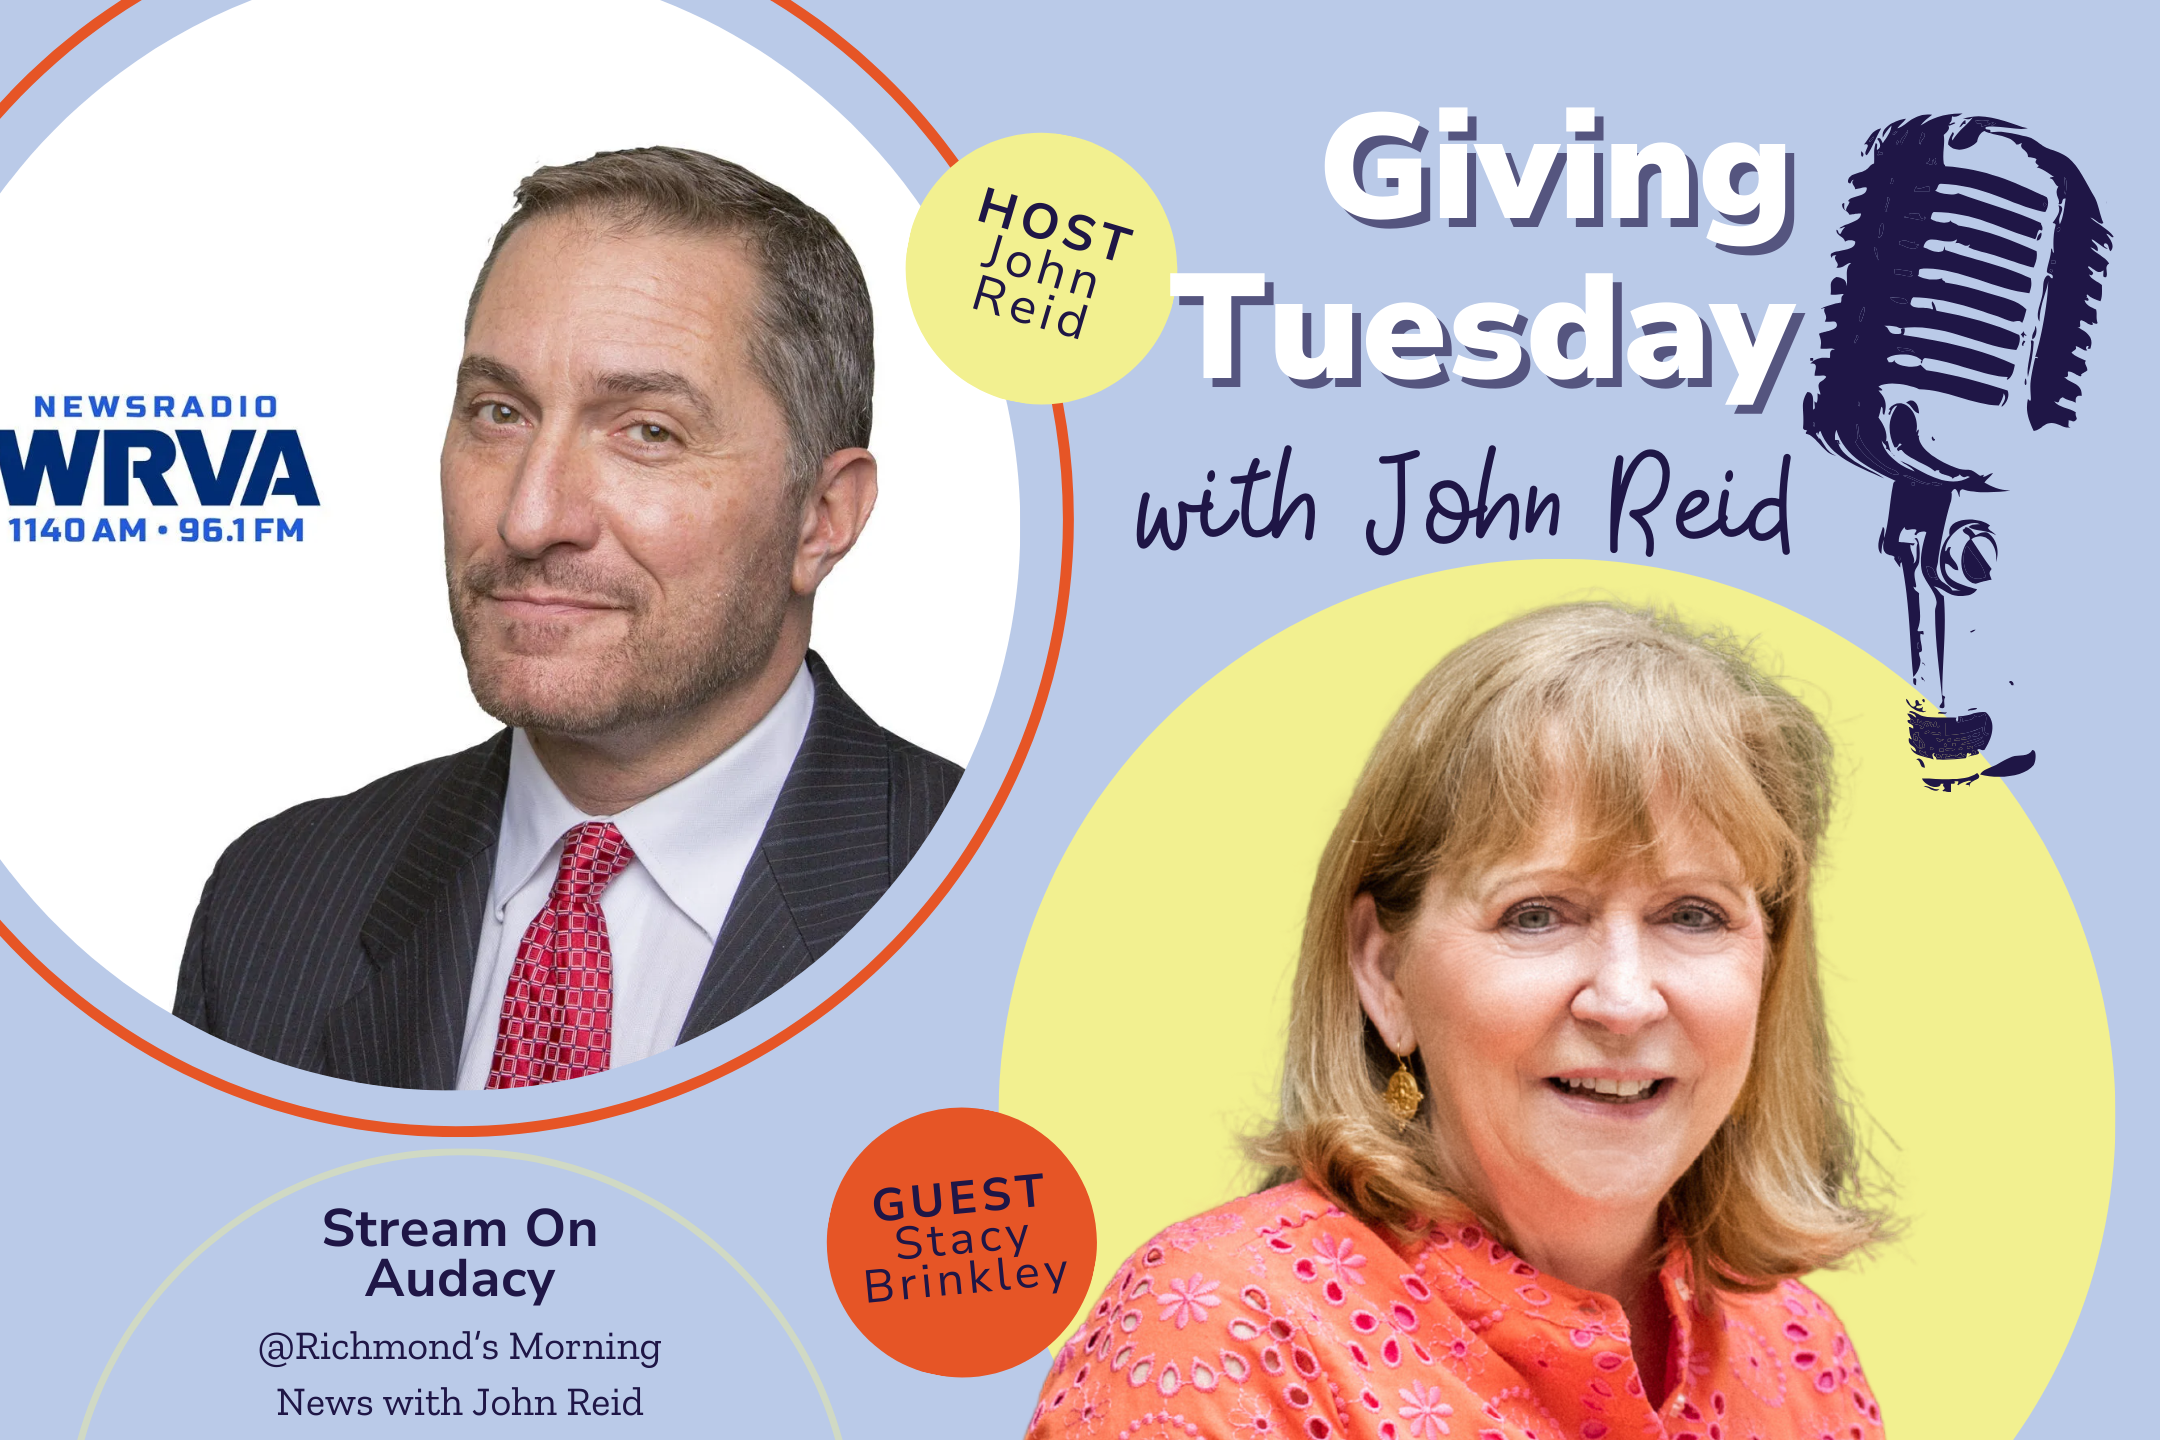 Photos of two adults along with text advertising for Giving Tuesday segment with John Reid